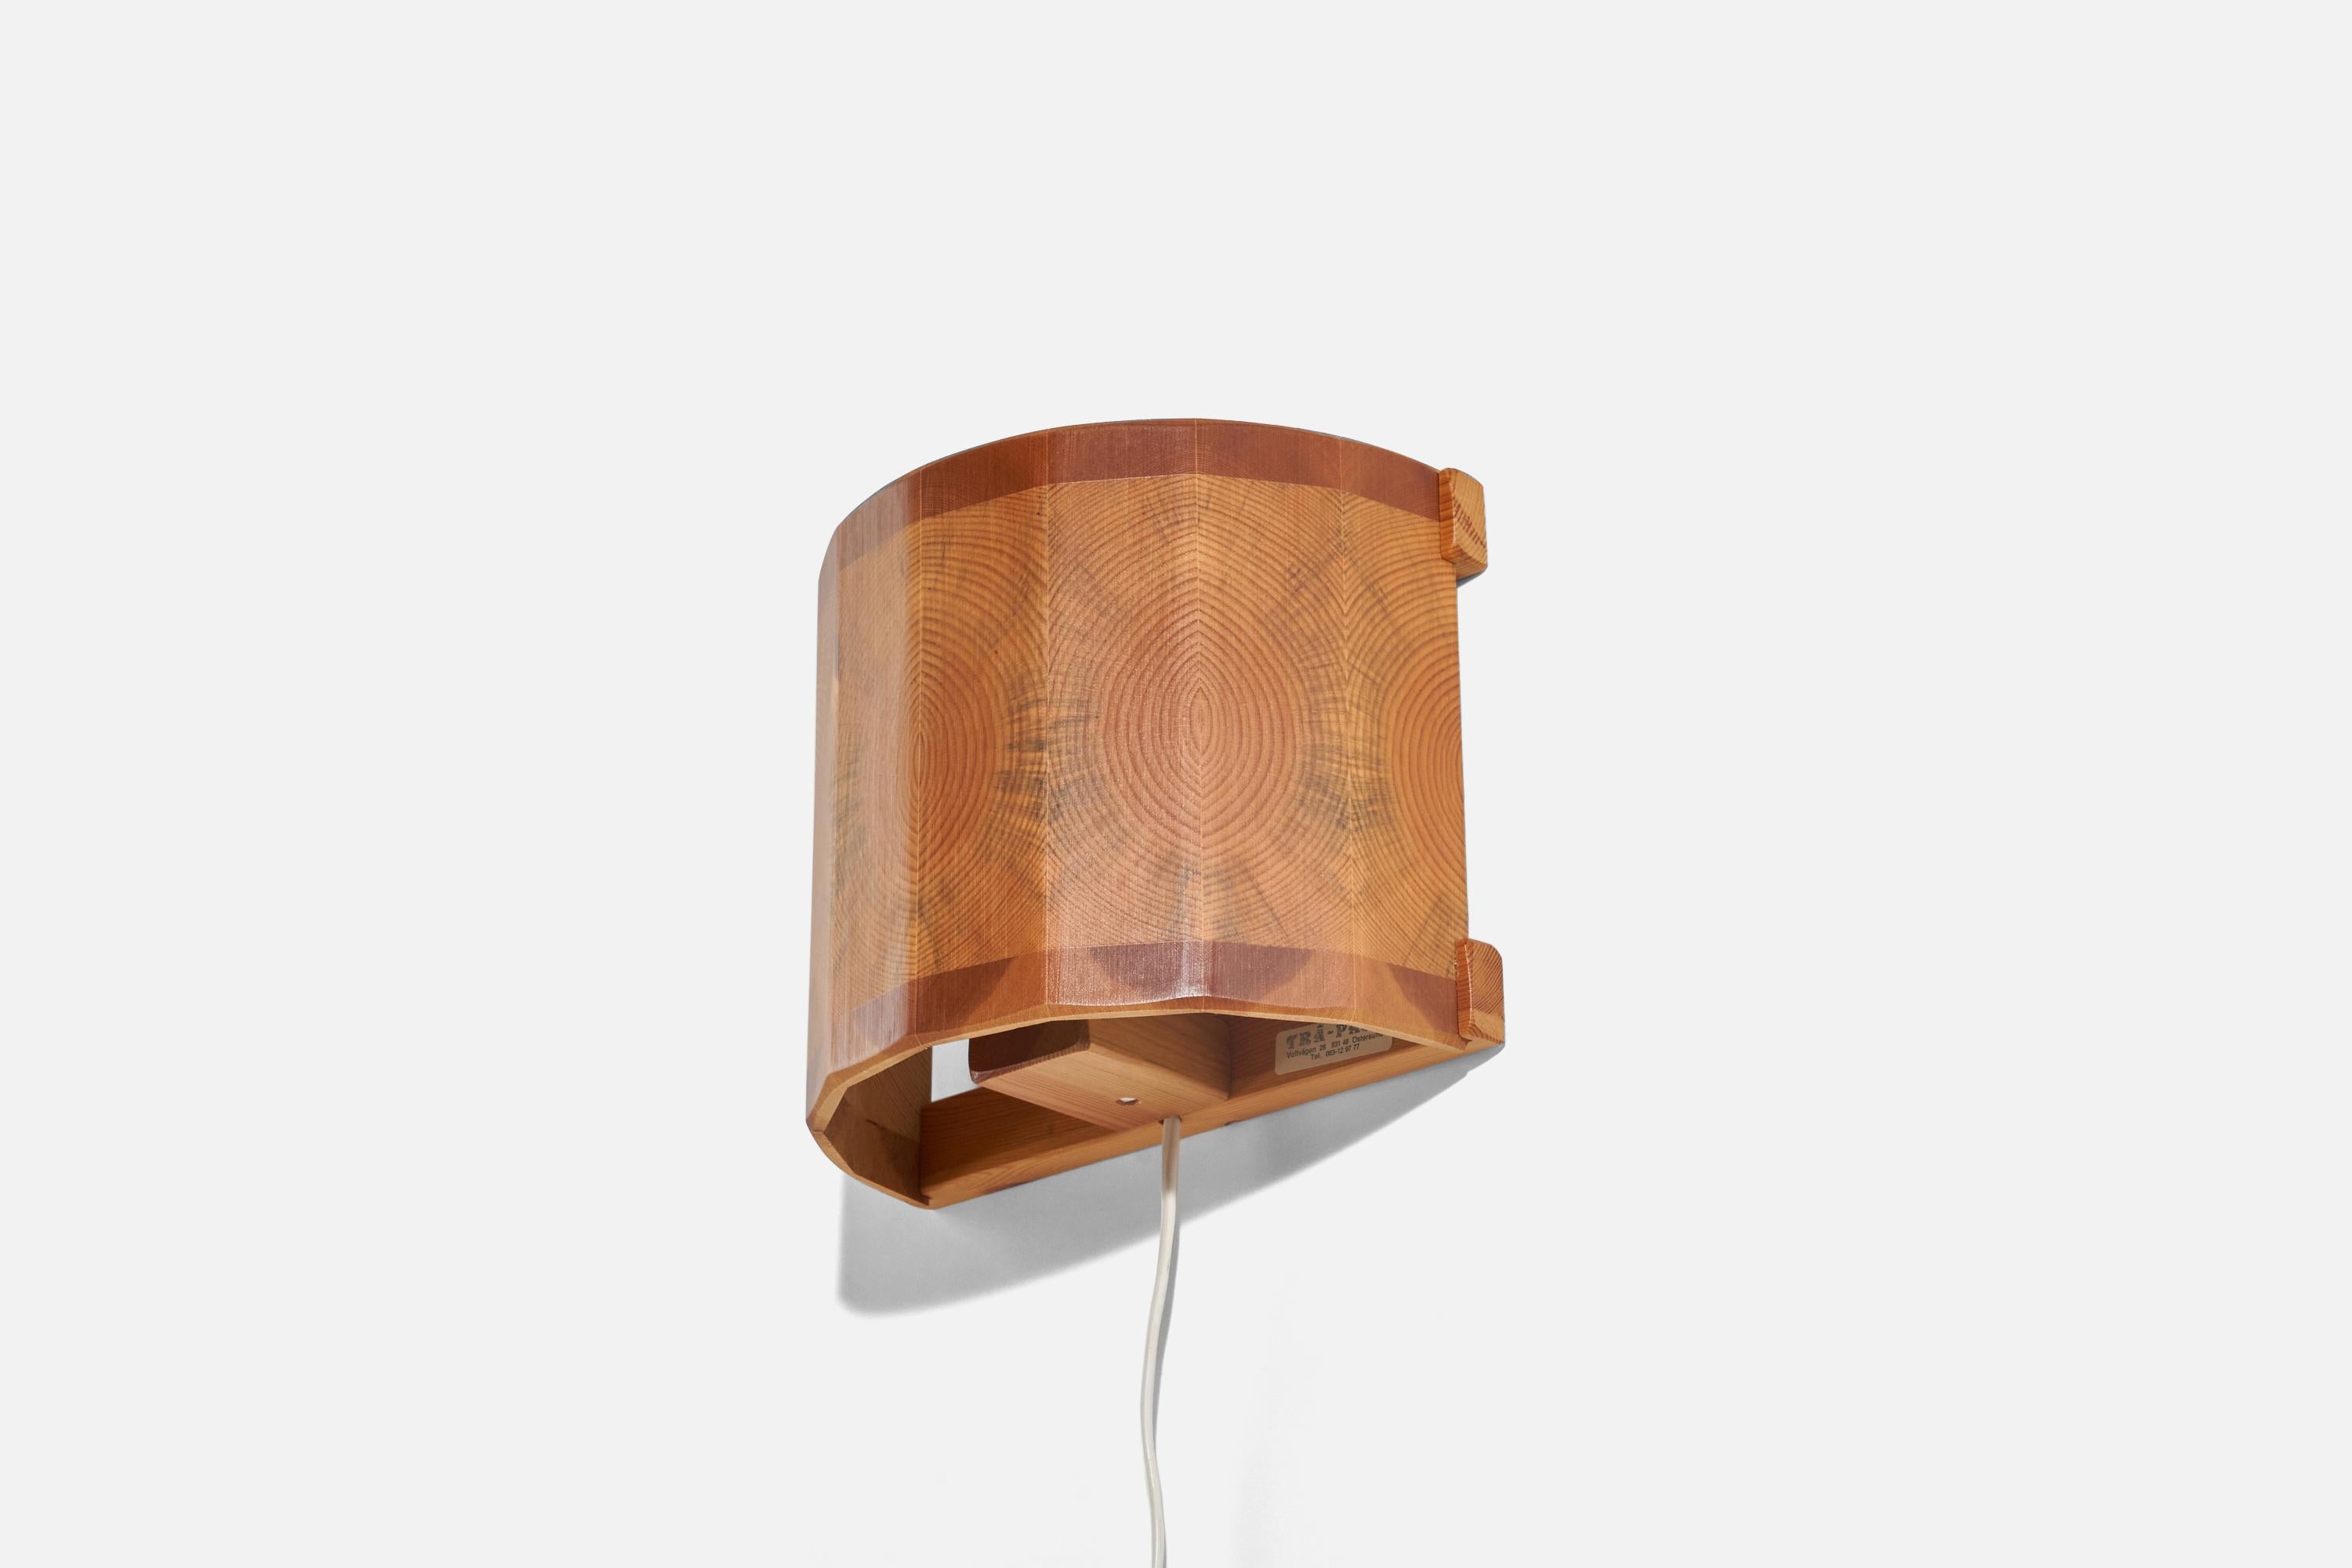 A pine sconce / wall light designed and produced in Sweden, 1970s.

Socket takes E-14 bulb.

There is no maximum wattage stated on the fixture.

Dimensions of Back Plate (inches) : 7.06 x 9.06 x 0.60 (Height x Width x Depth).